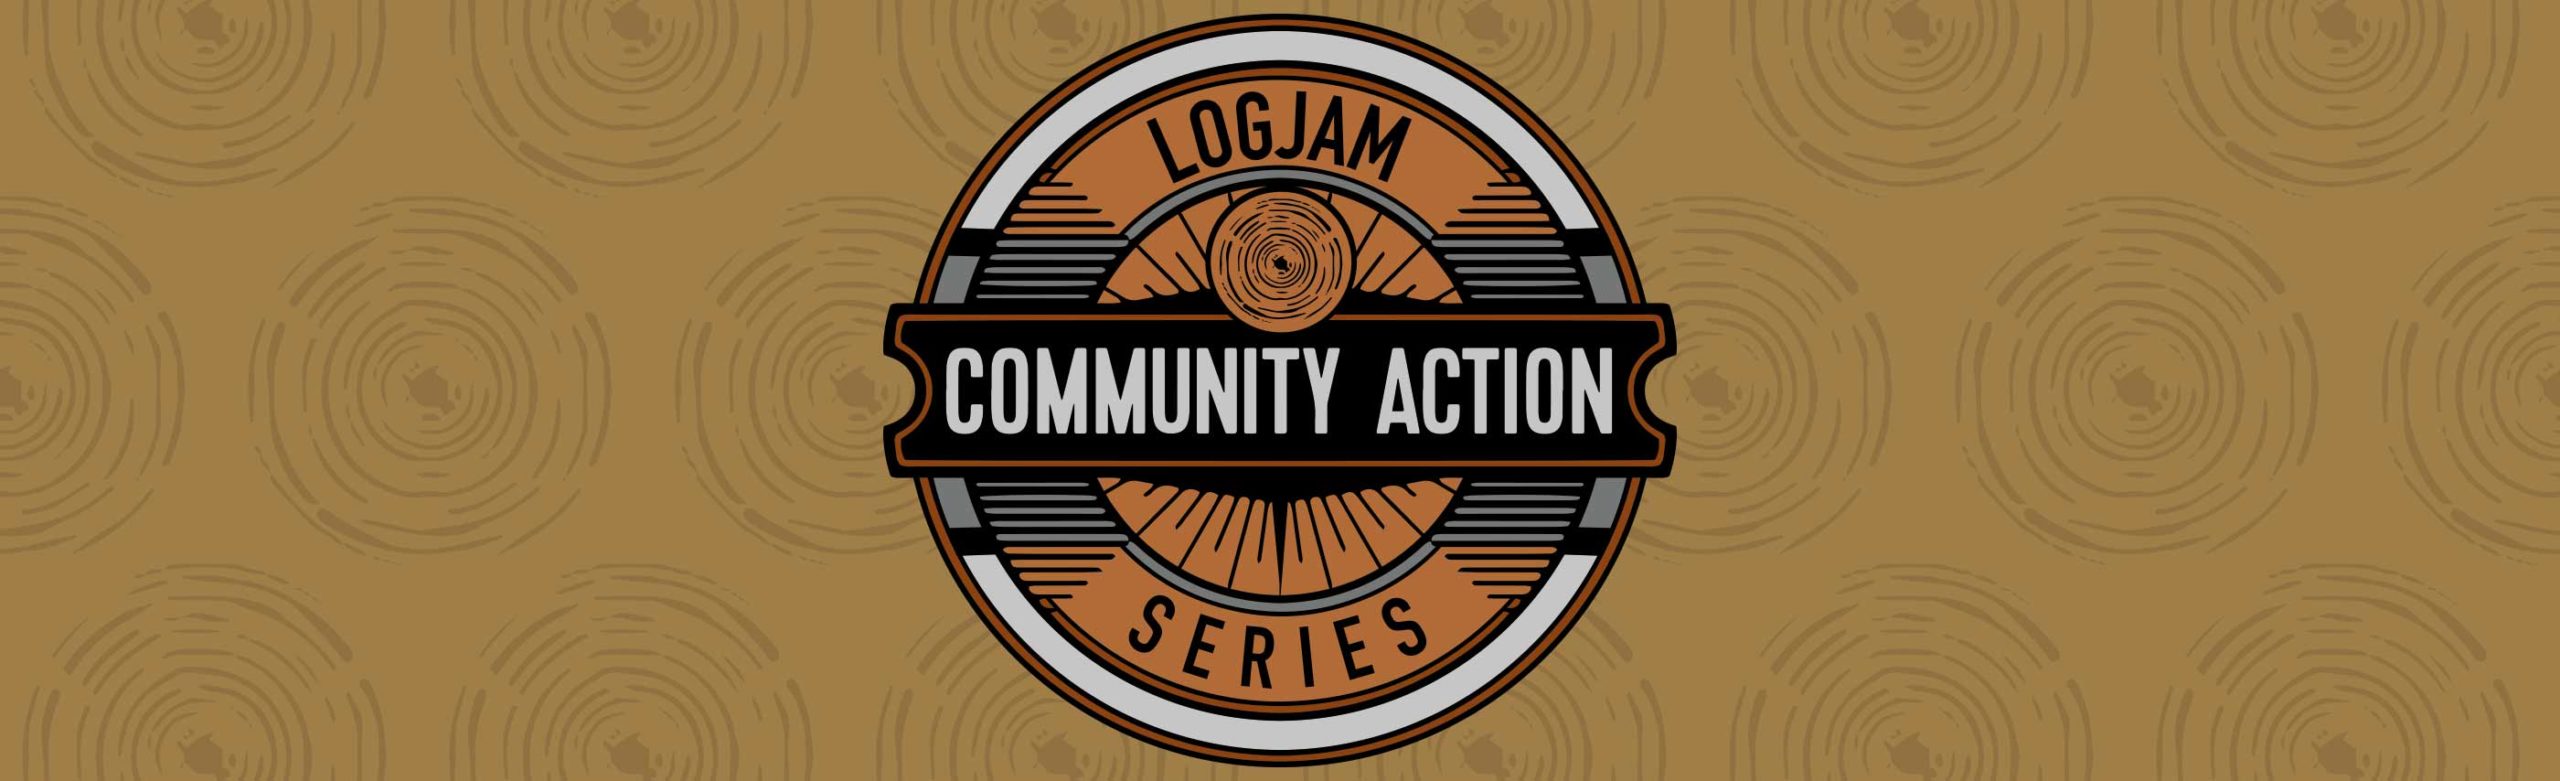 Logjam Donates $50,000 to SPARK! and Announces Community Action Series Image